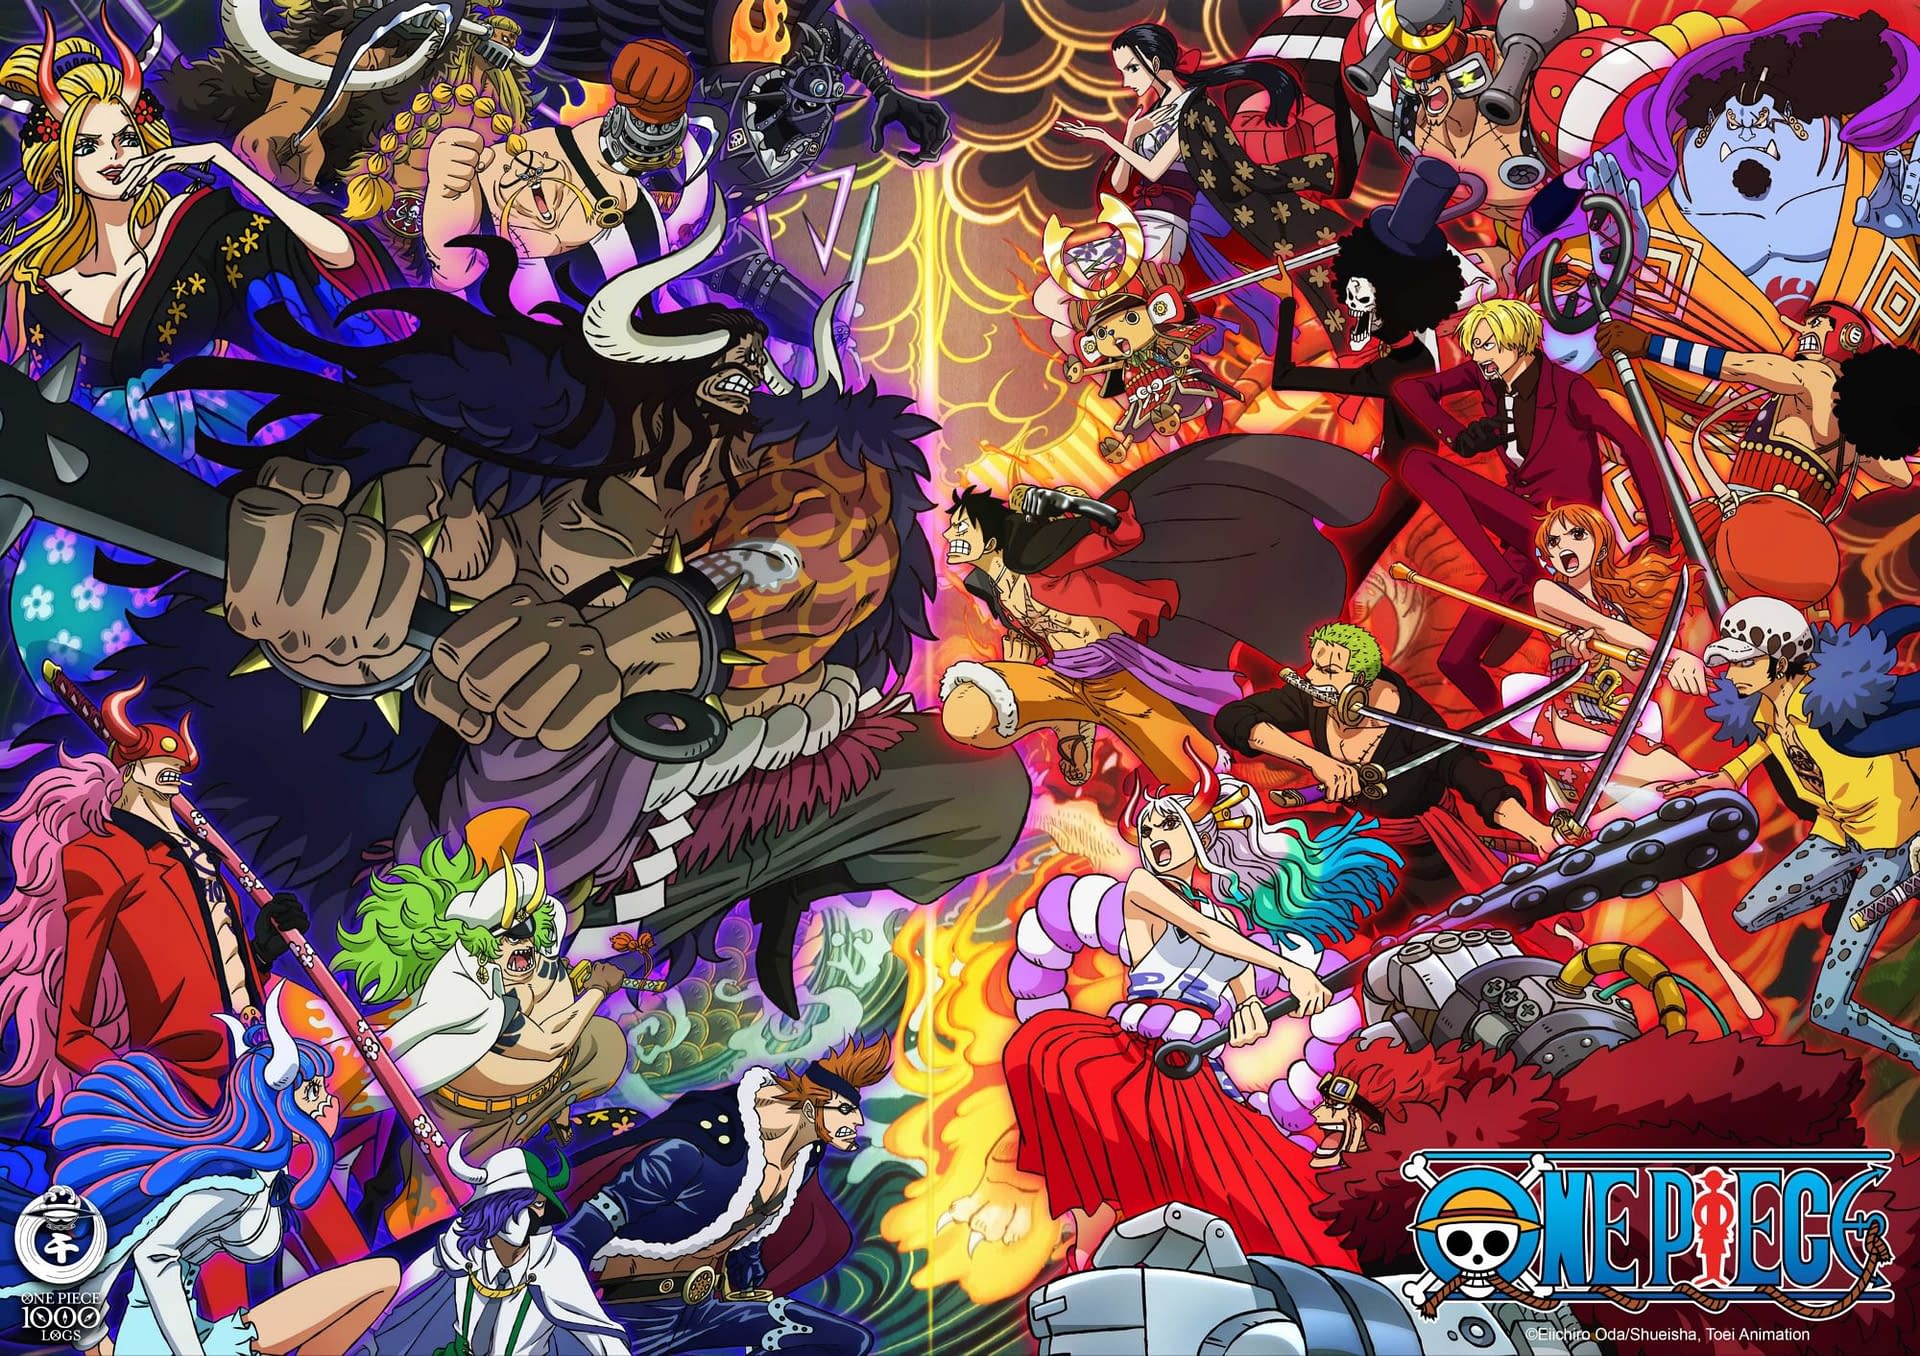 Japan's hit 'One Piece' anime marks 1,000th episode